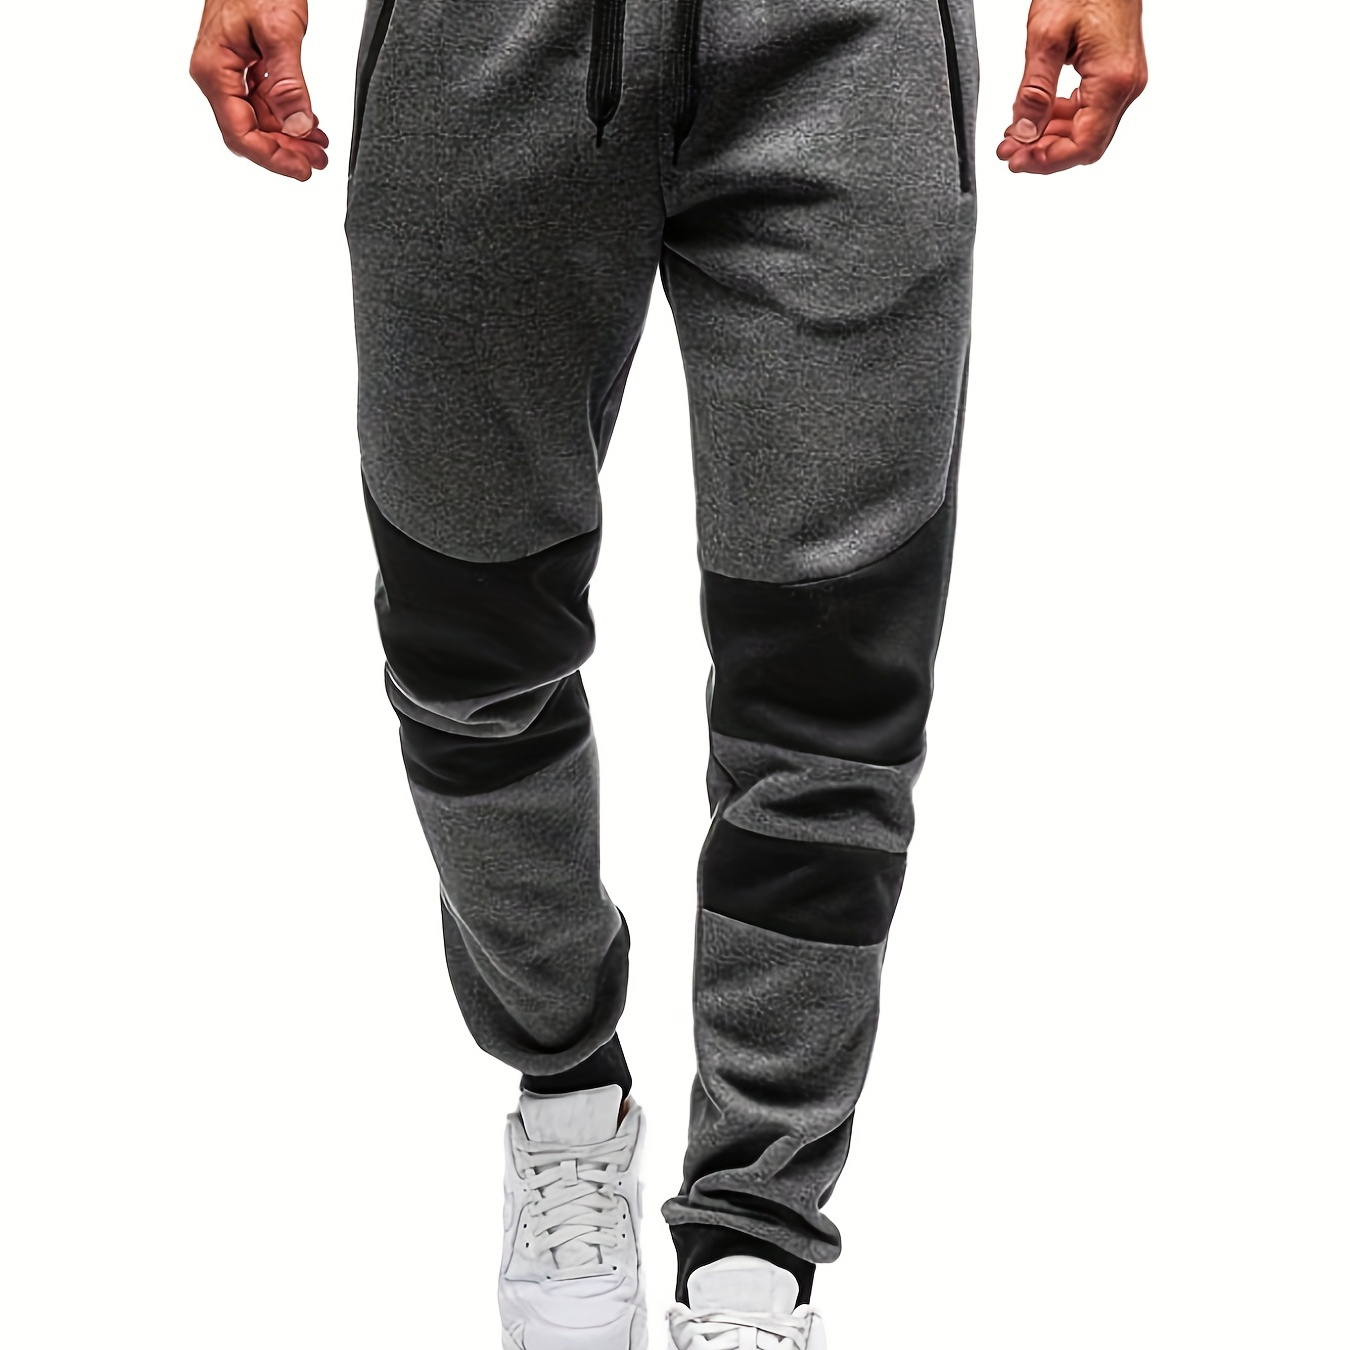 

Color Block Joggers, Men's Casual Loose Fit Slightly Stretch Waist Drawstring Pants For The 4 Seasons Fitness Cycling